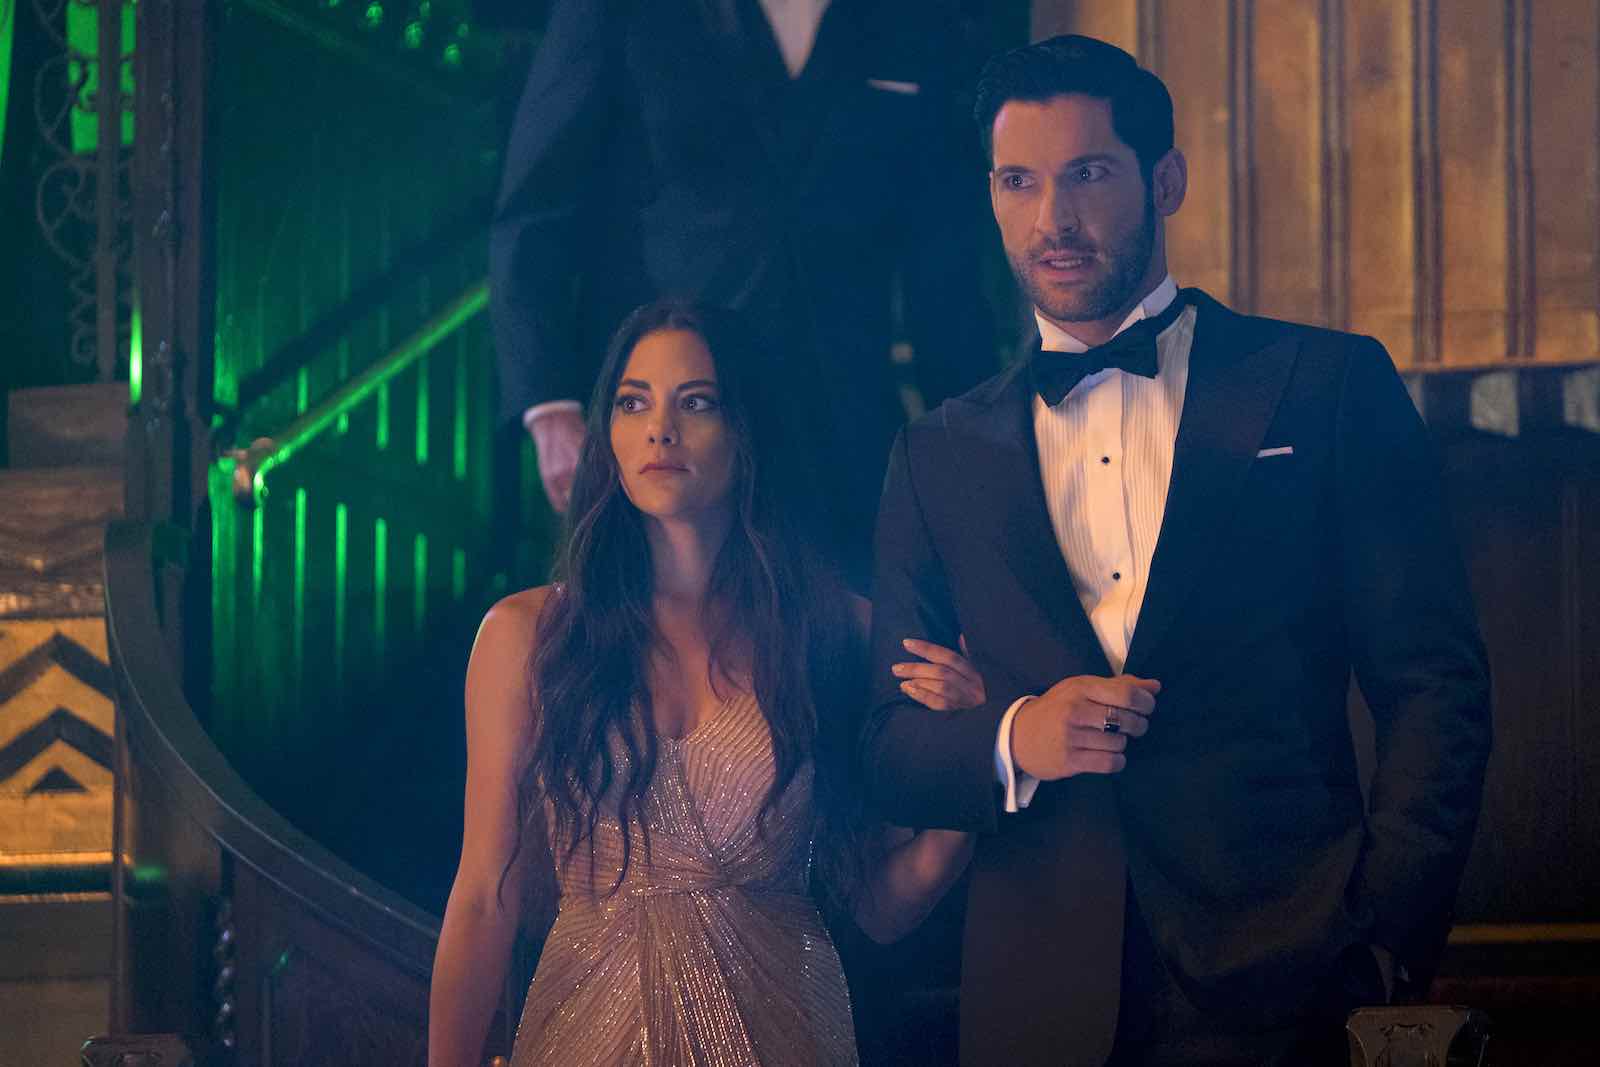 We were ever so excited for 'Lucifer' season 4, and costume was a big part of it. Here's a look back at our sneak peak of the hot devil’s lewks we expected.